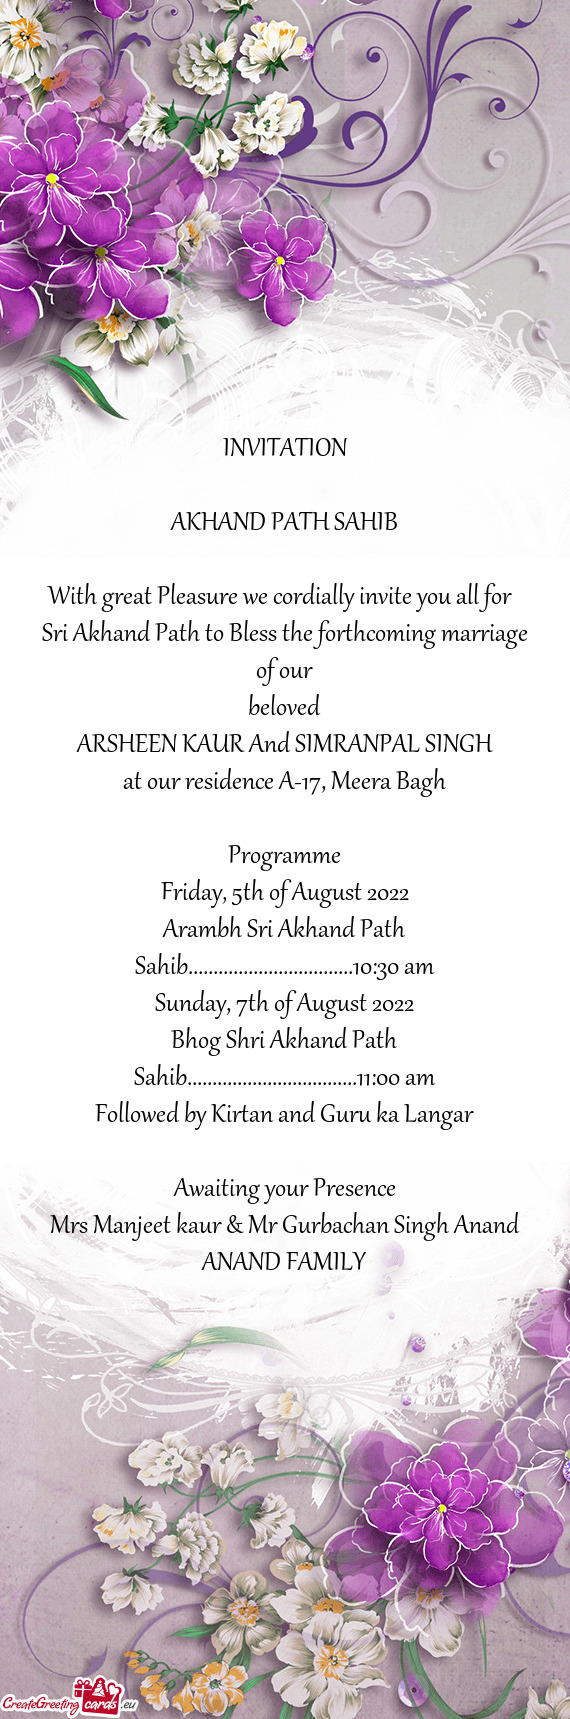 Sri Akhand Path to Bless the forthcoming marriage of our